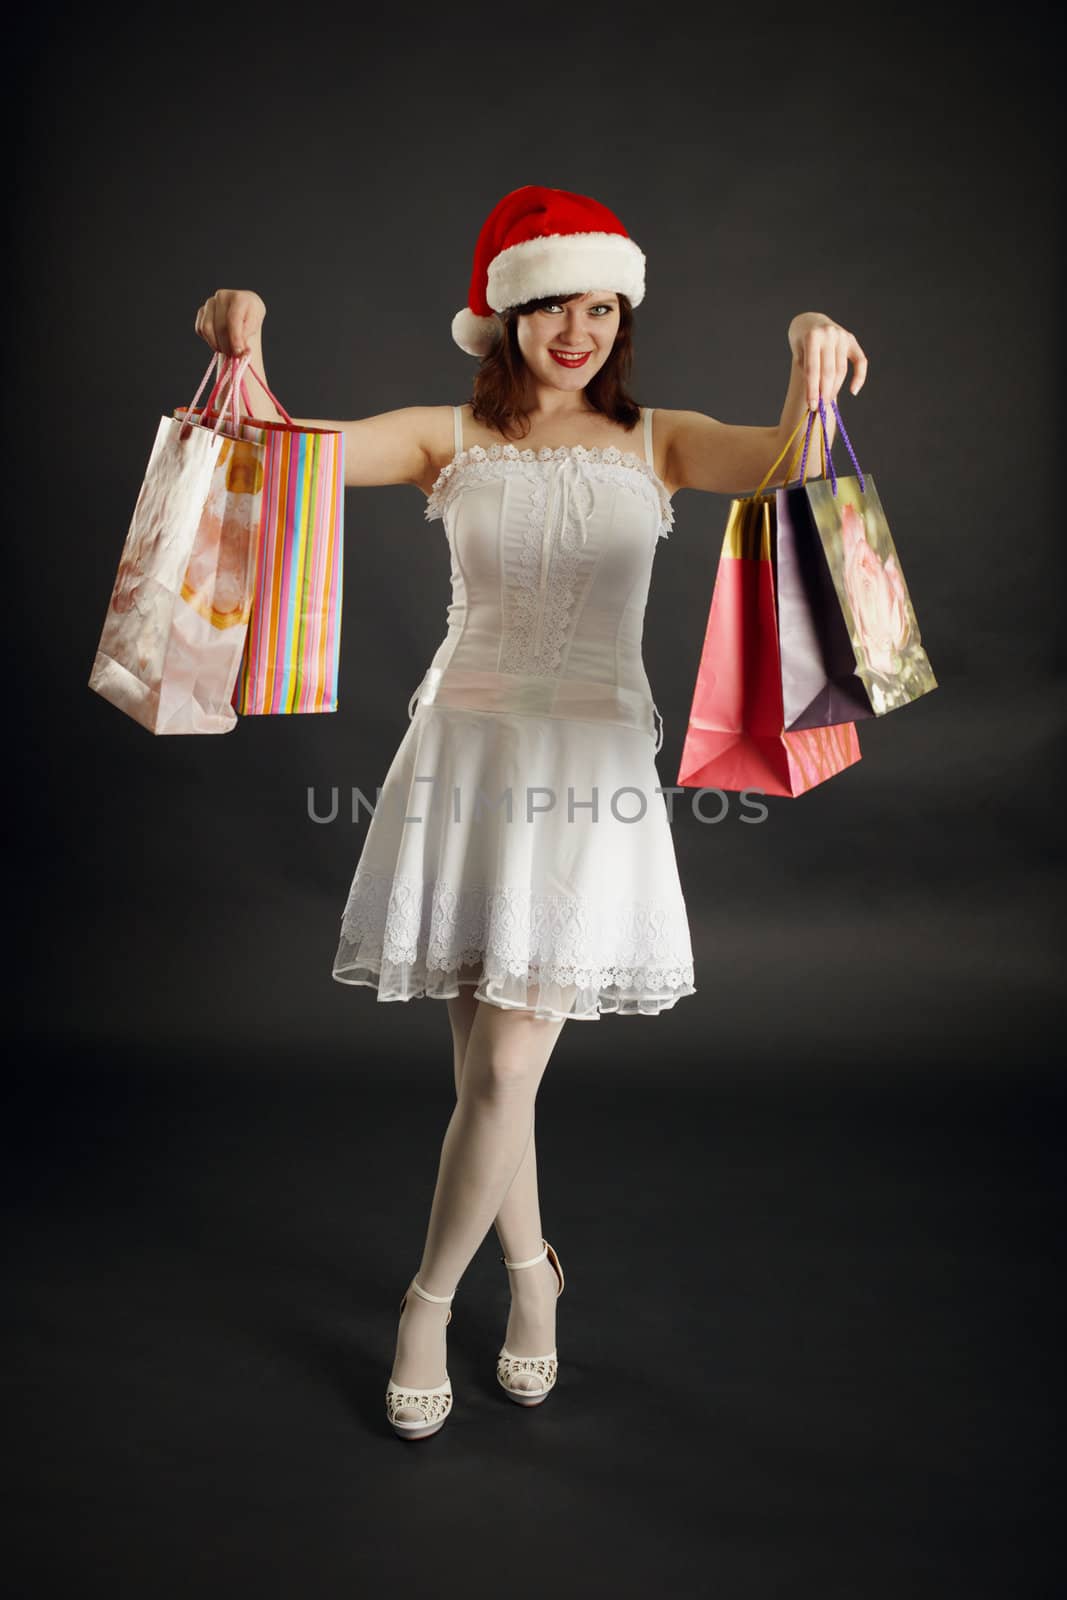 The woman rejoices to Christmas purchases against a dark background